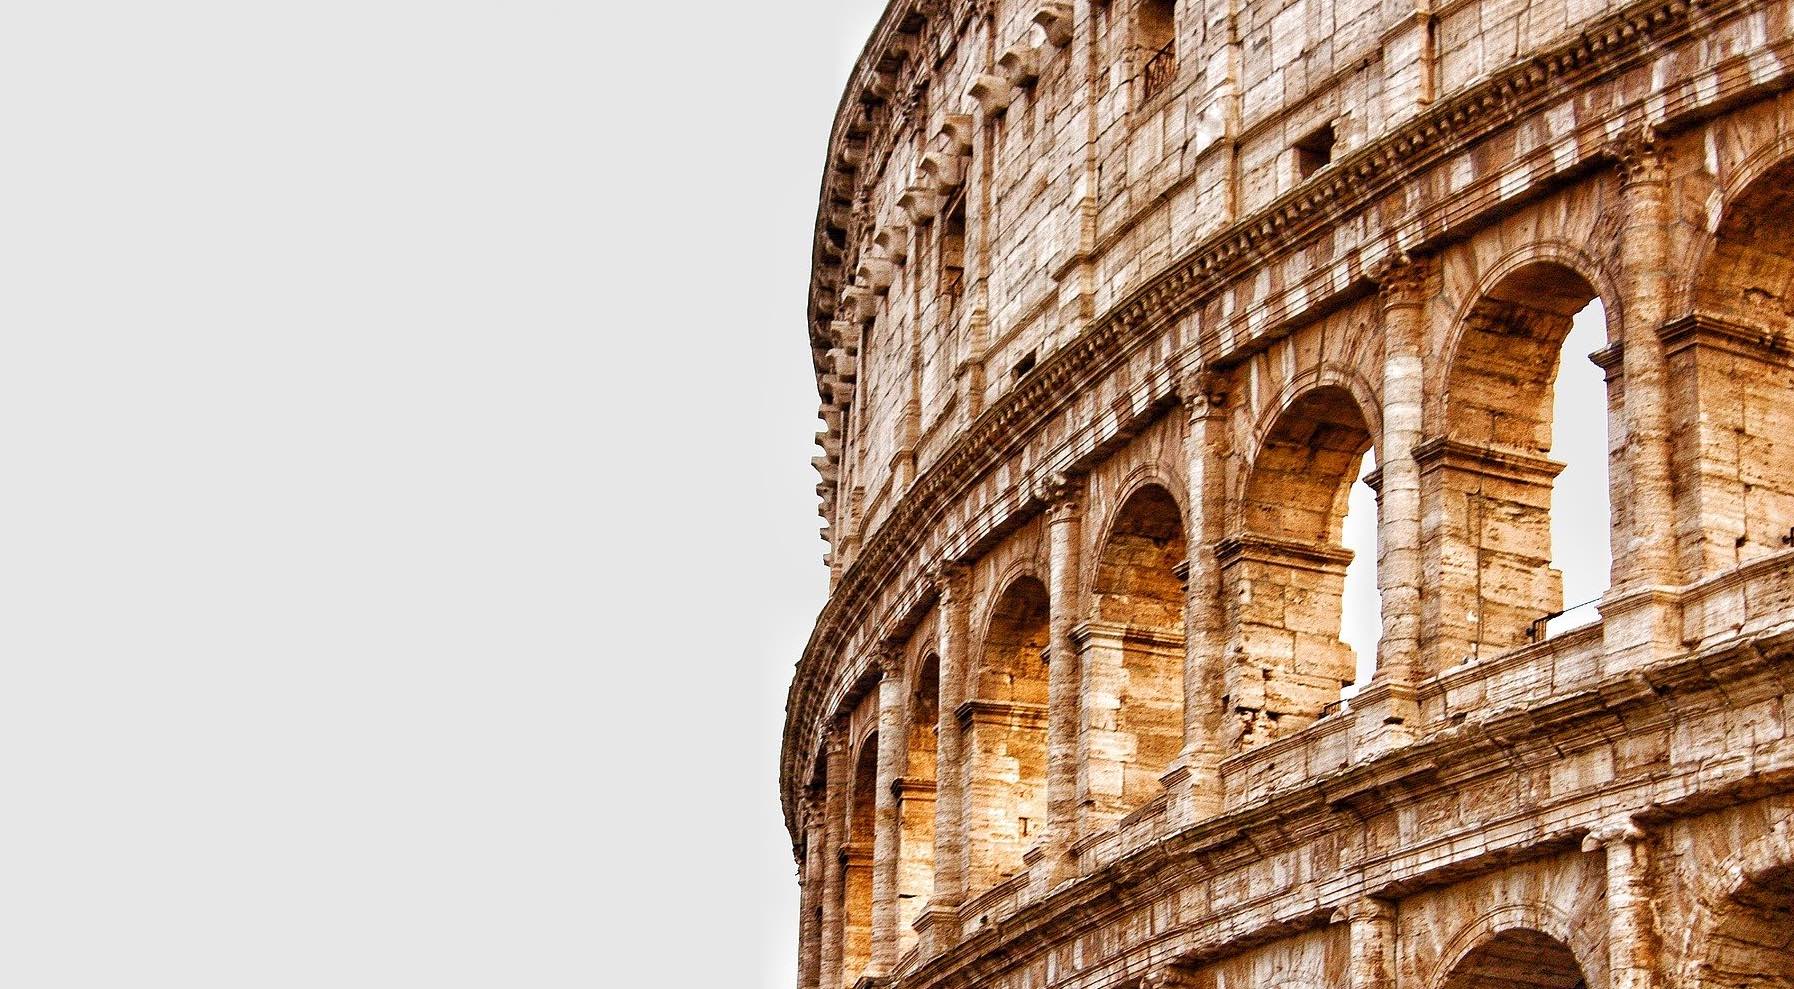 The ultimate architecture experience - the colosseum in Rome, Italy.